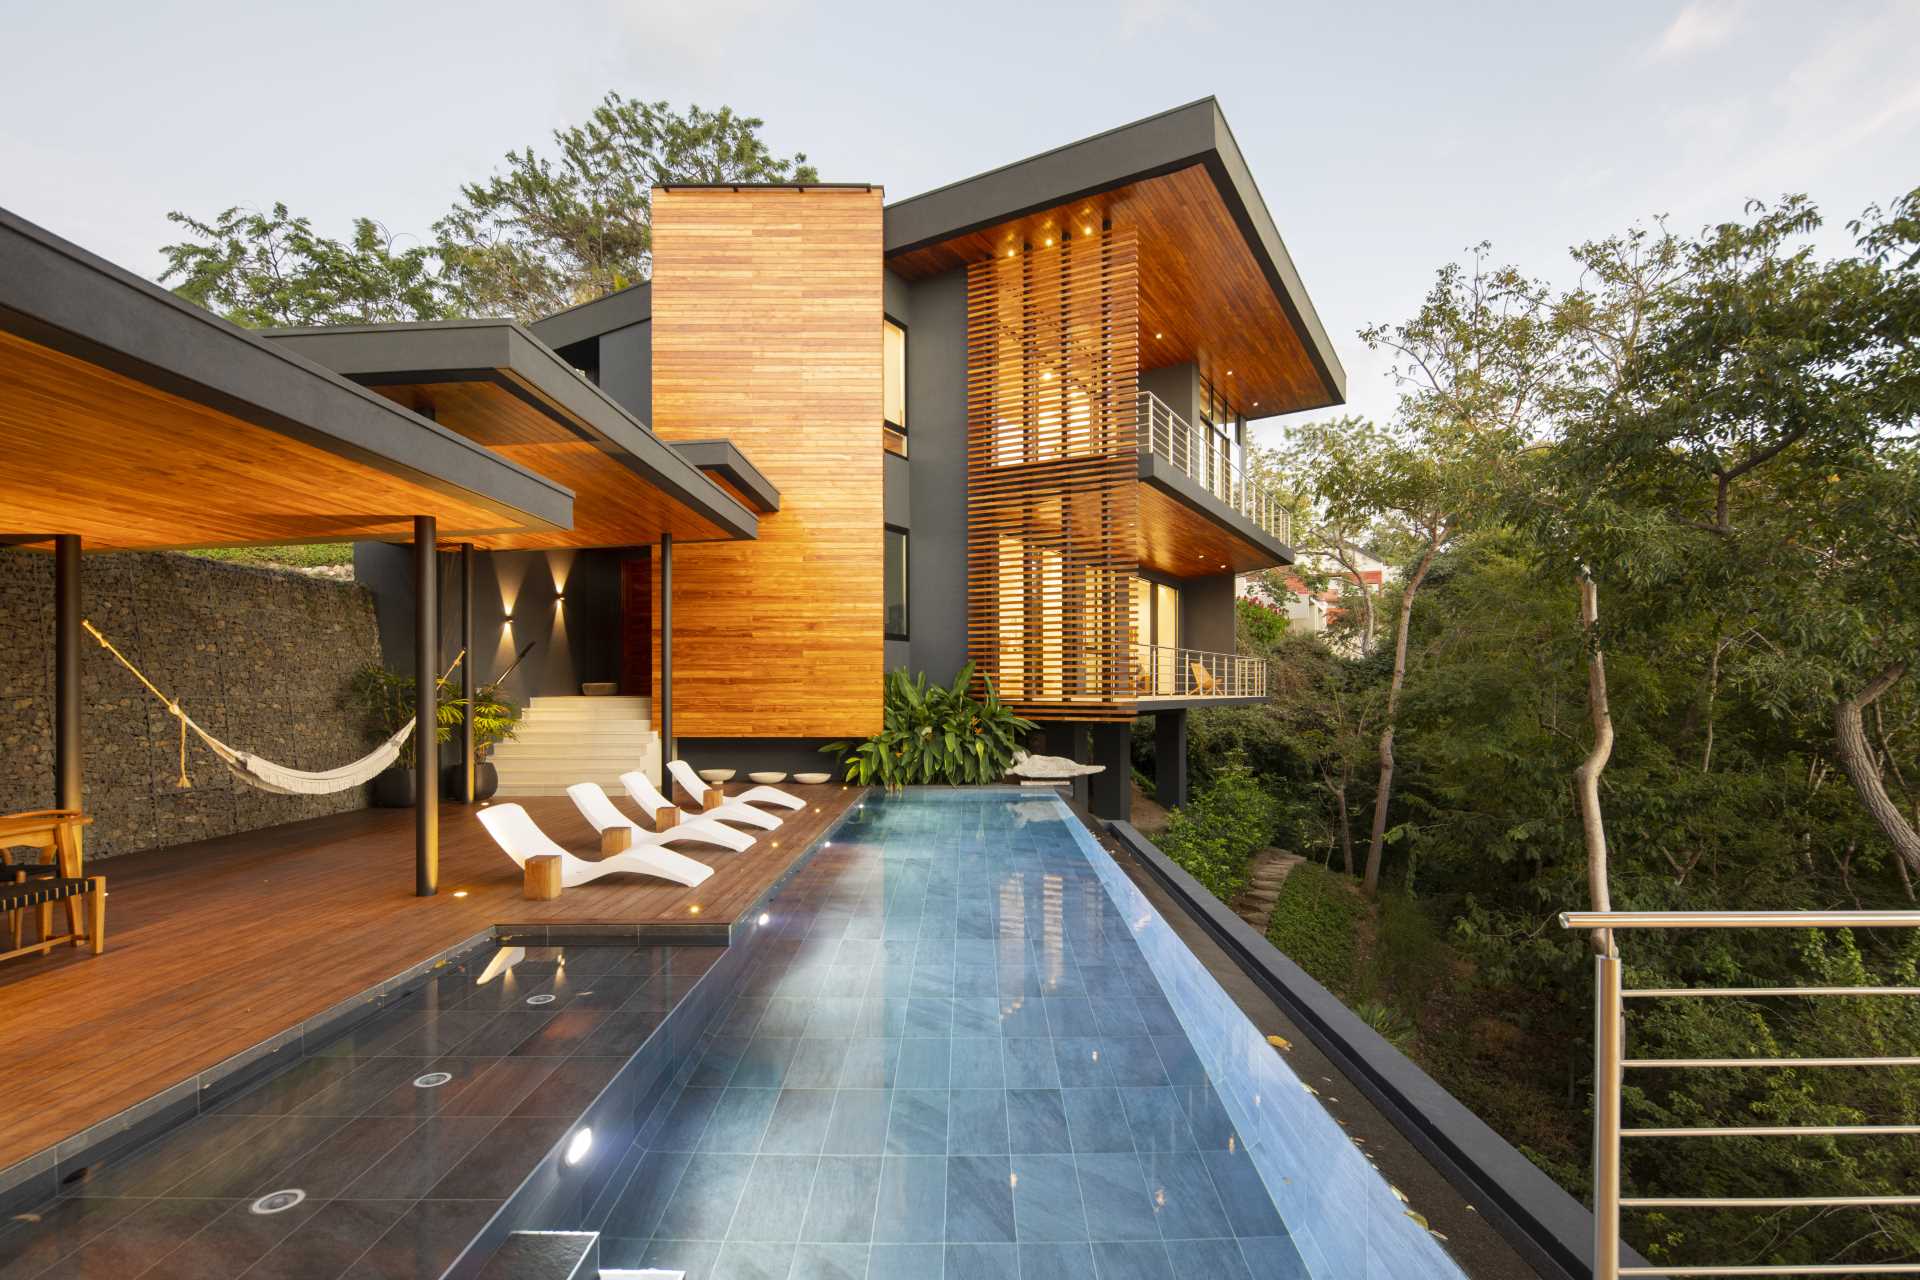 A modern home designed on a steep slope.